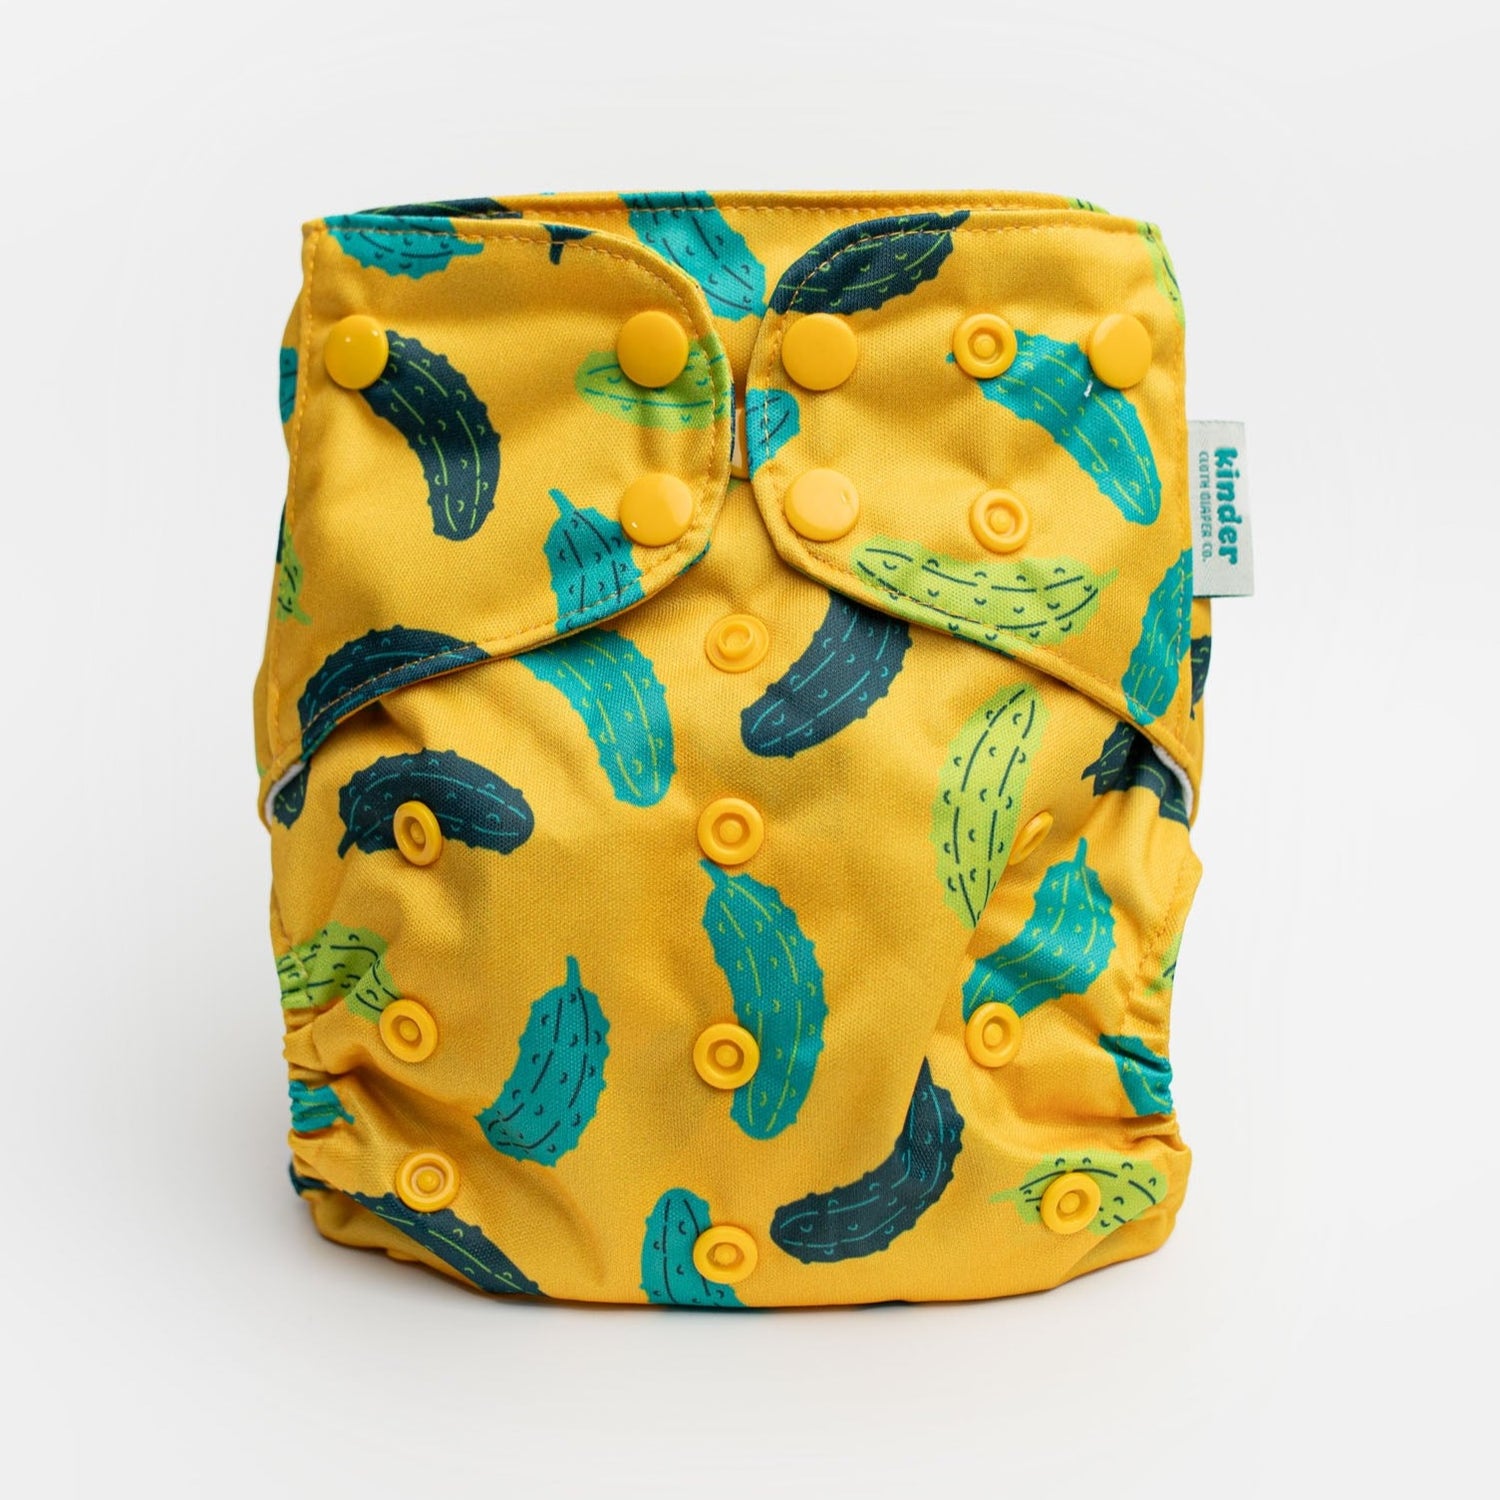 pickle print modern reusable cloth diaper with athletic wicking jersey mesh lining awj easy to clean pocket diapers pittsburgh yellow